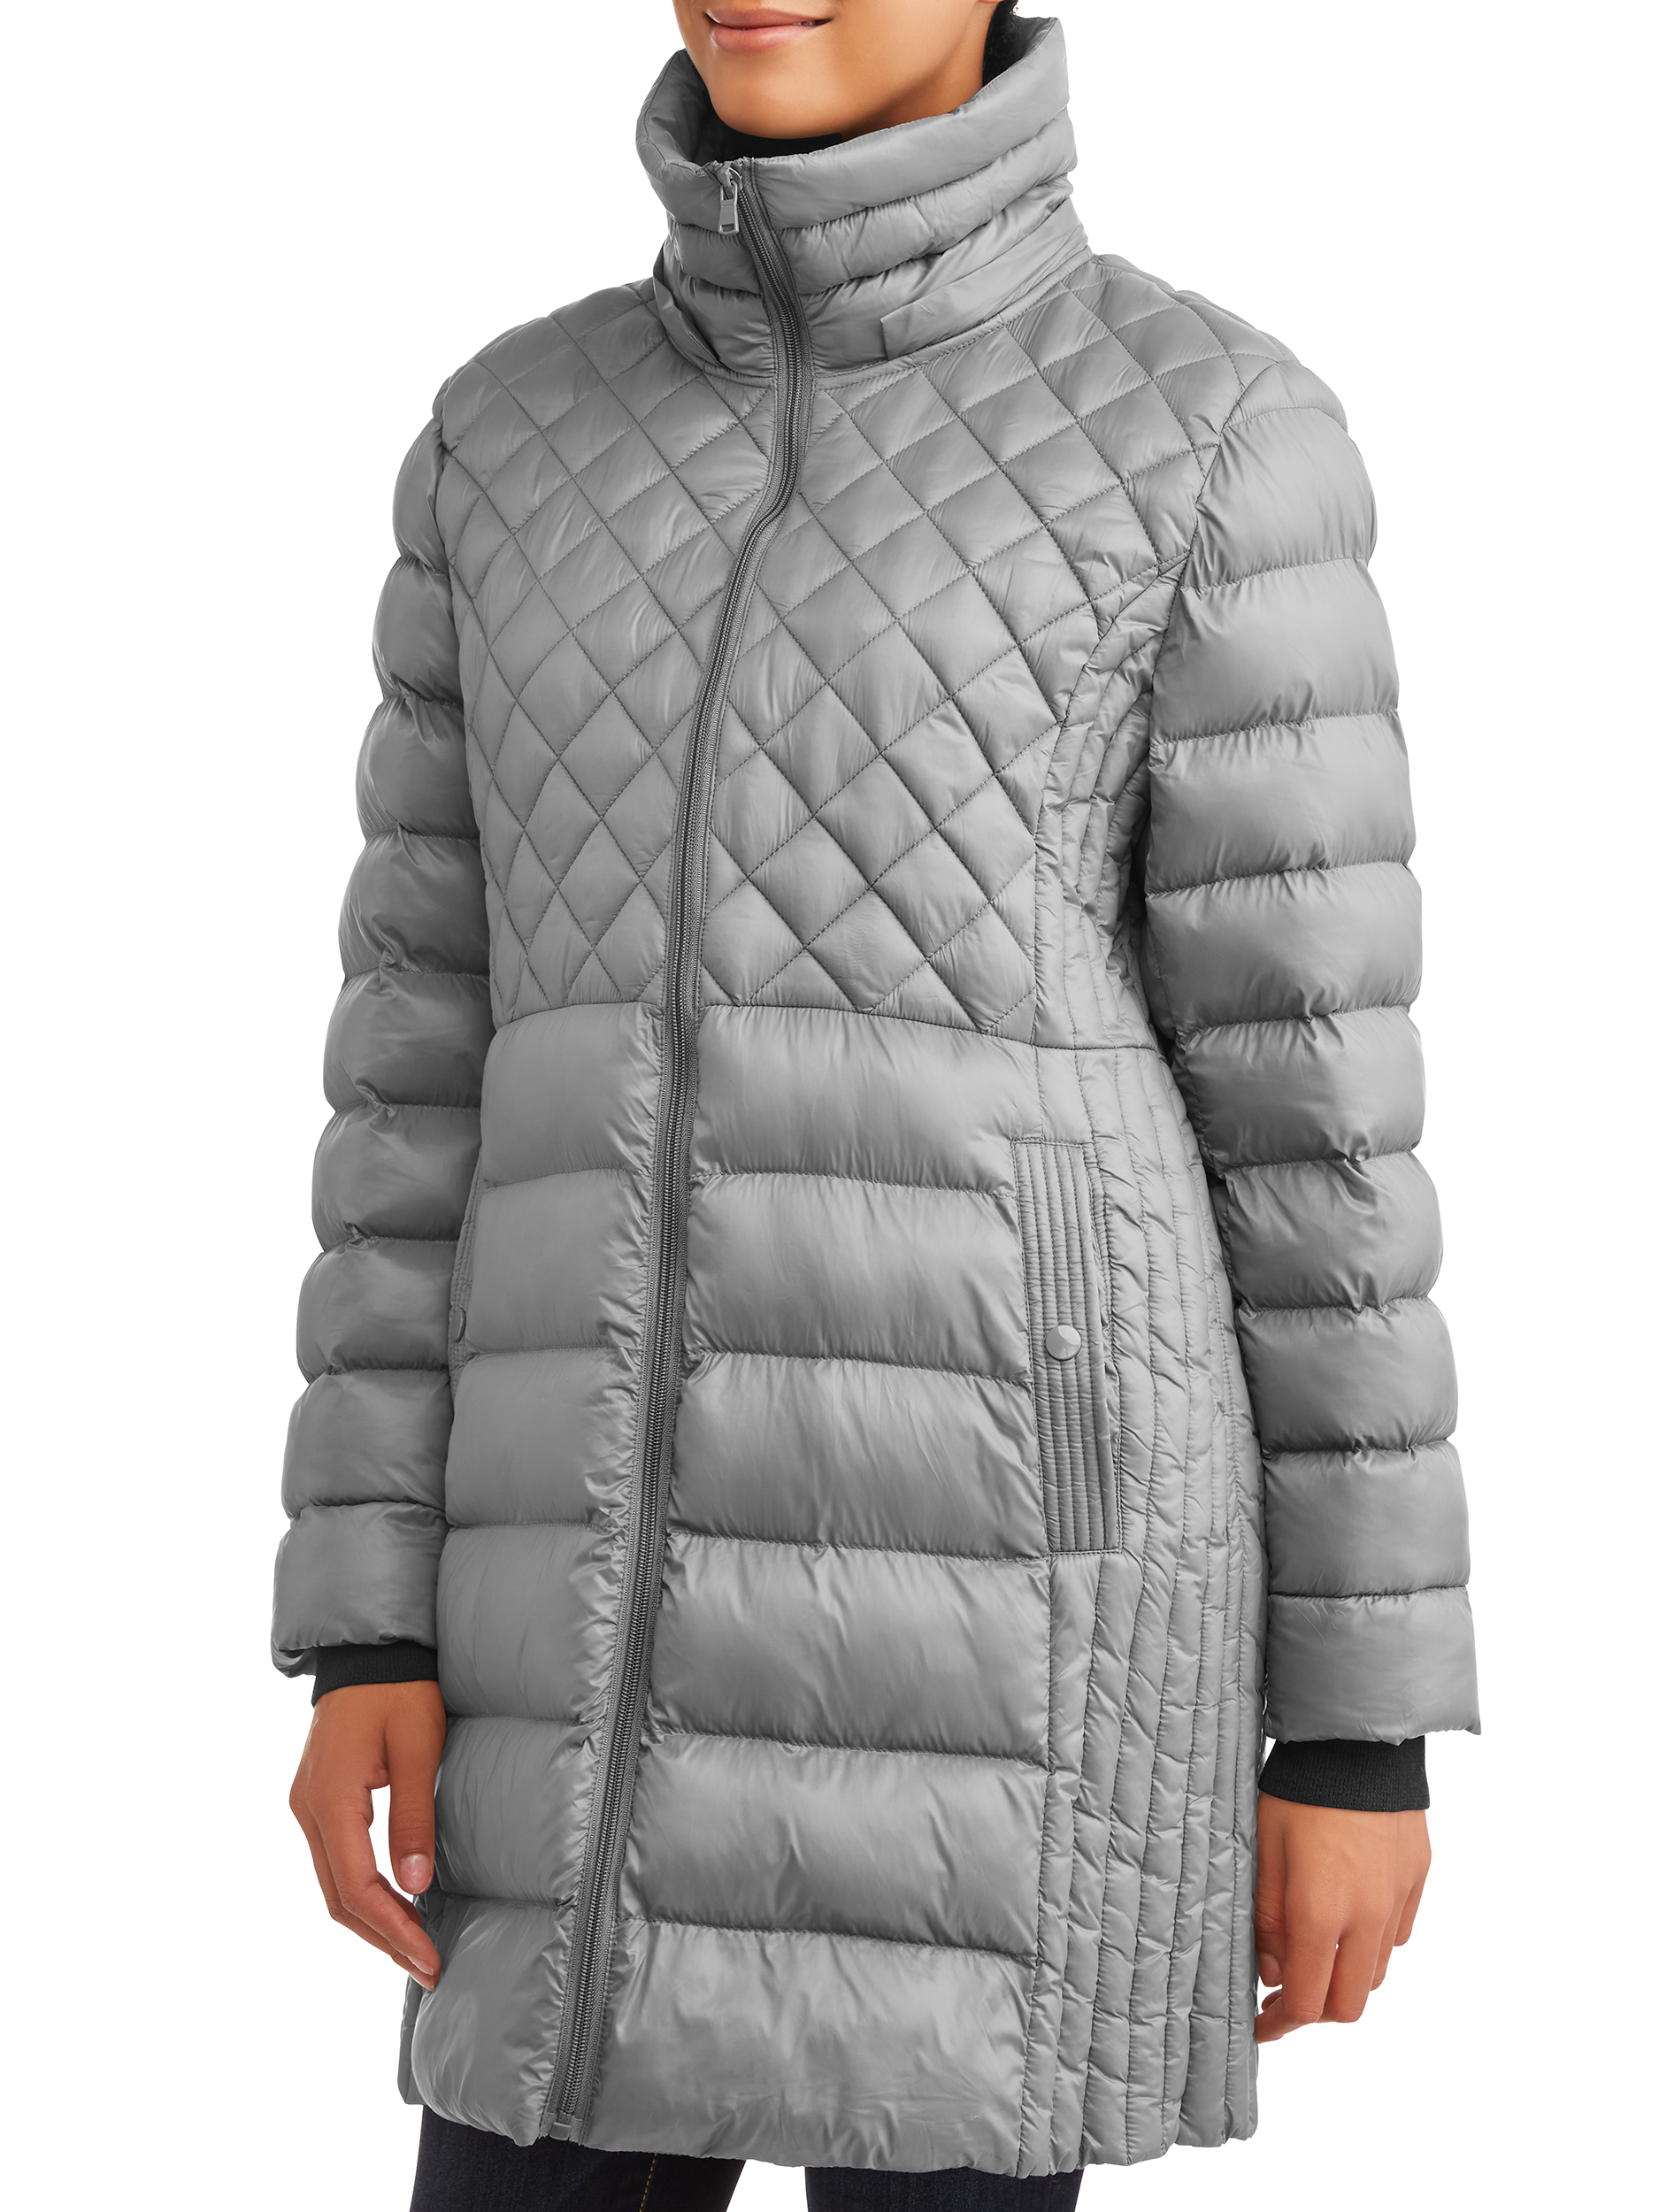 30 First Women's Quilted Puffer Jacket - image 4 of 4